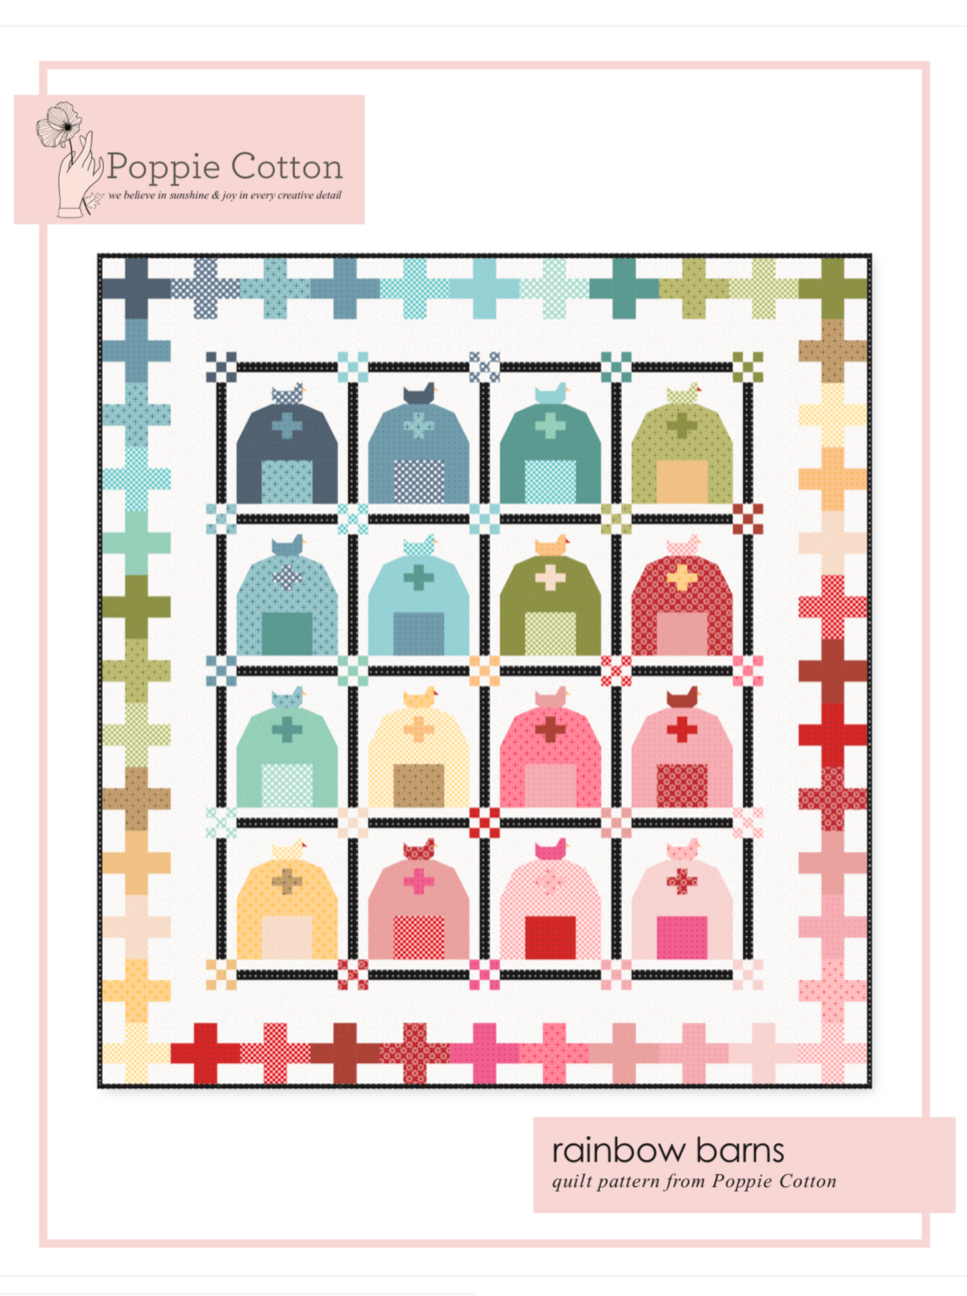 Rainbow Barns Quilt Pattern, for the Poppie Cotton Basics Collection